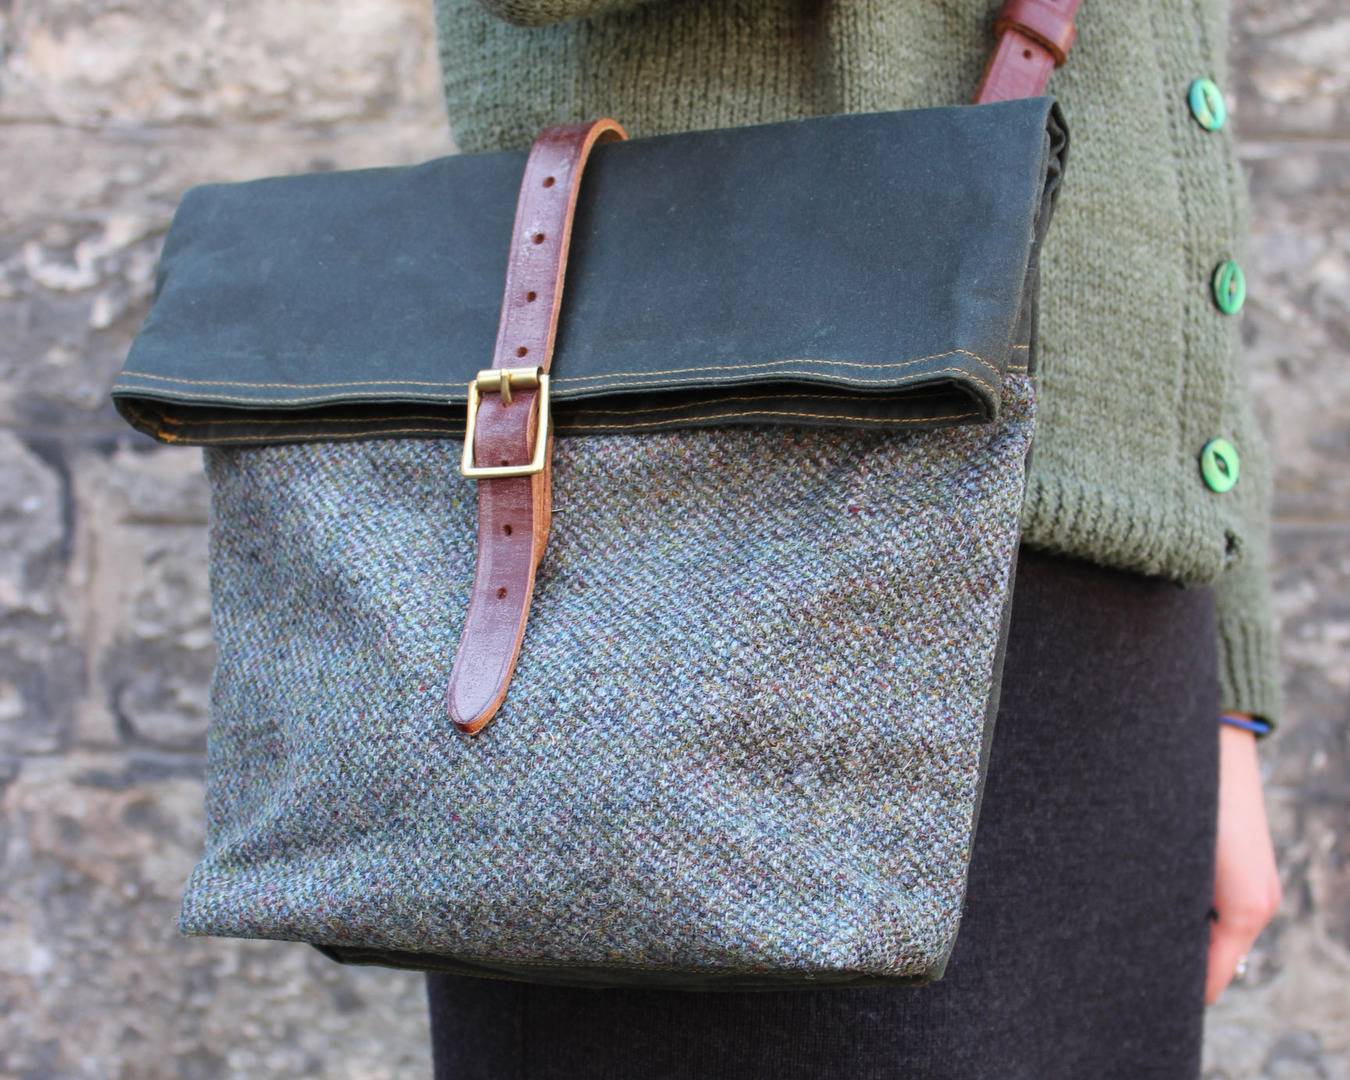 Waxed cotton and Harris Tweed cross-body bag, made exclusively for Scottish Textiles Showcase, Scottish Textiles Showcase